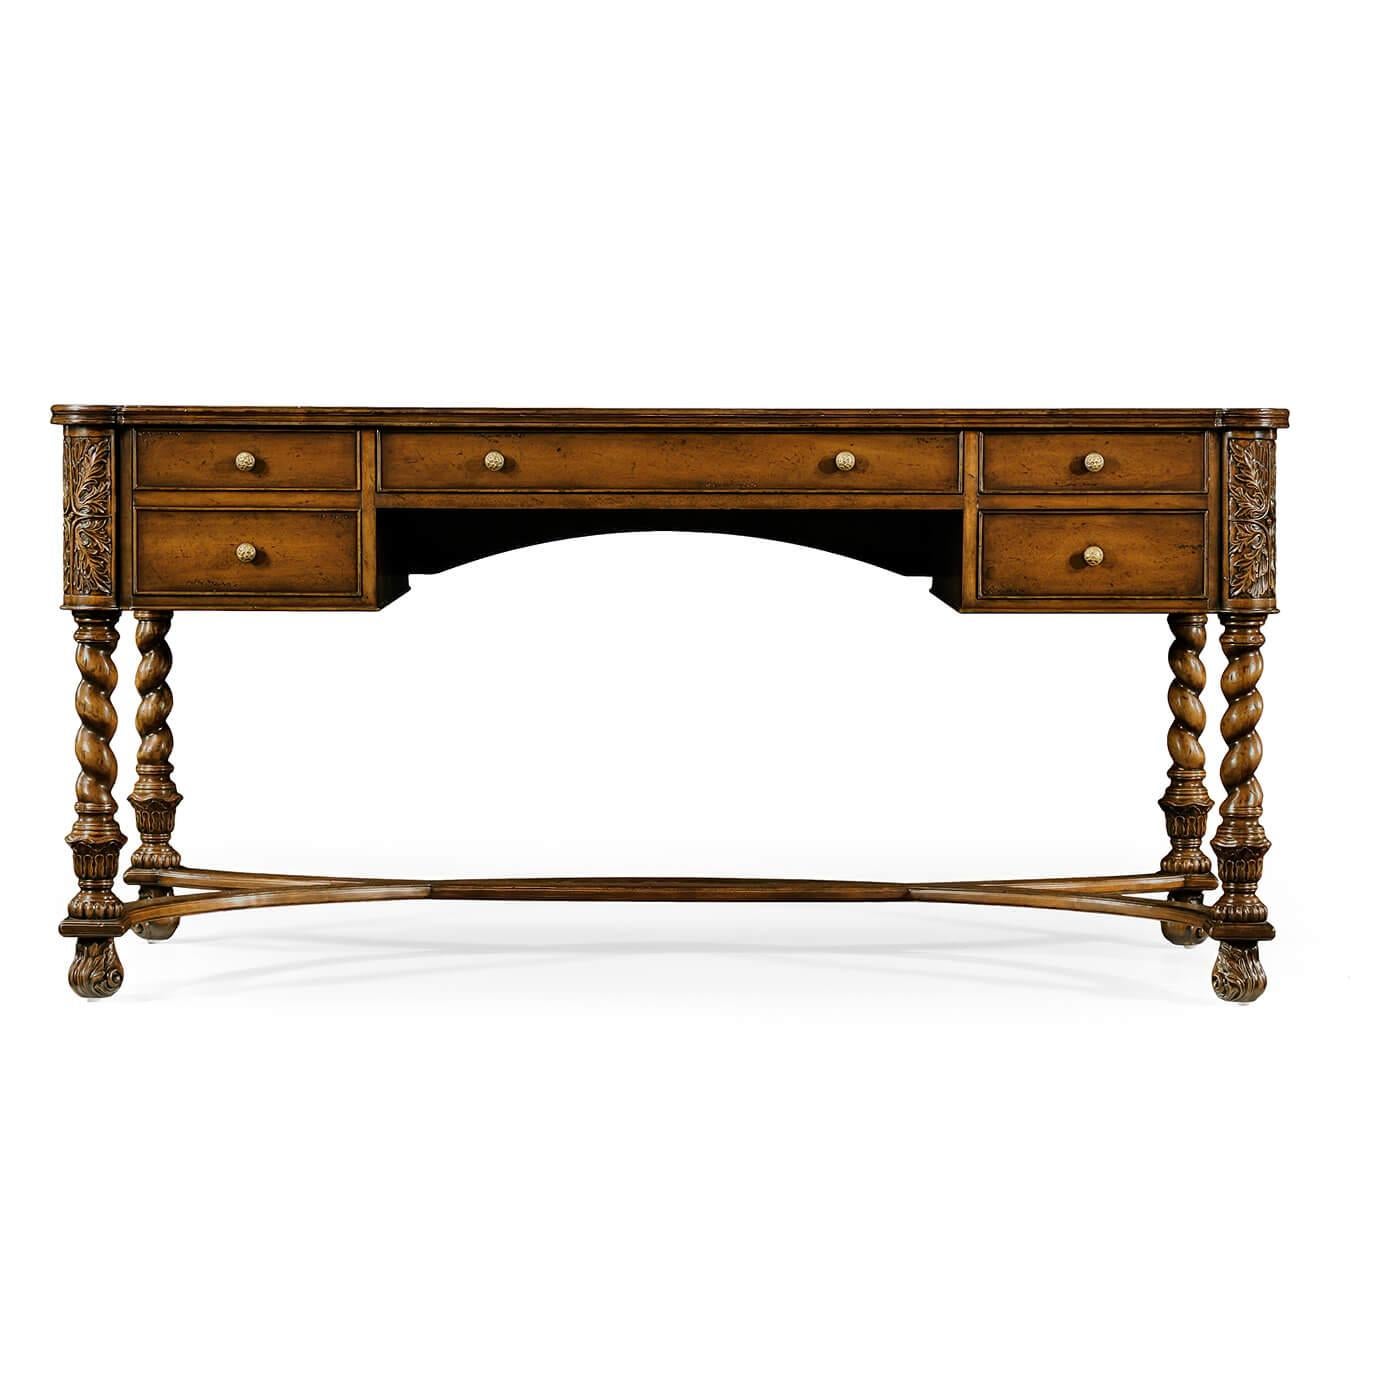 William and Mary style walnut desk, with a tan inset leather top with oyster veneer details to the edges of the writing surface set on heavily carved and barley twist legs with intersecting C-Stretchers. 

Dimensions: 63